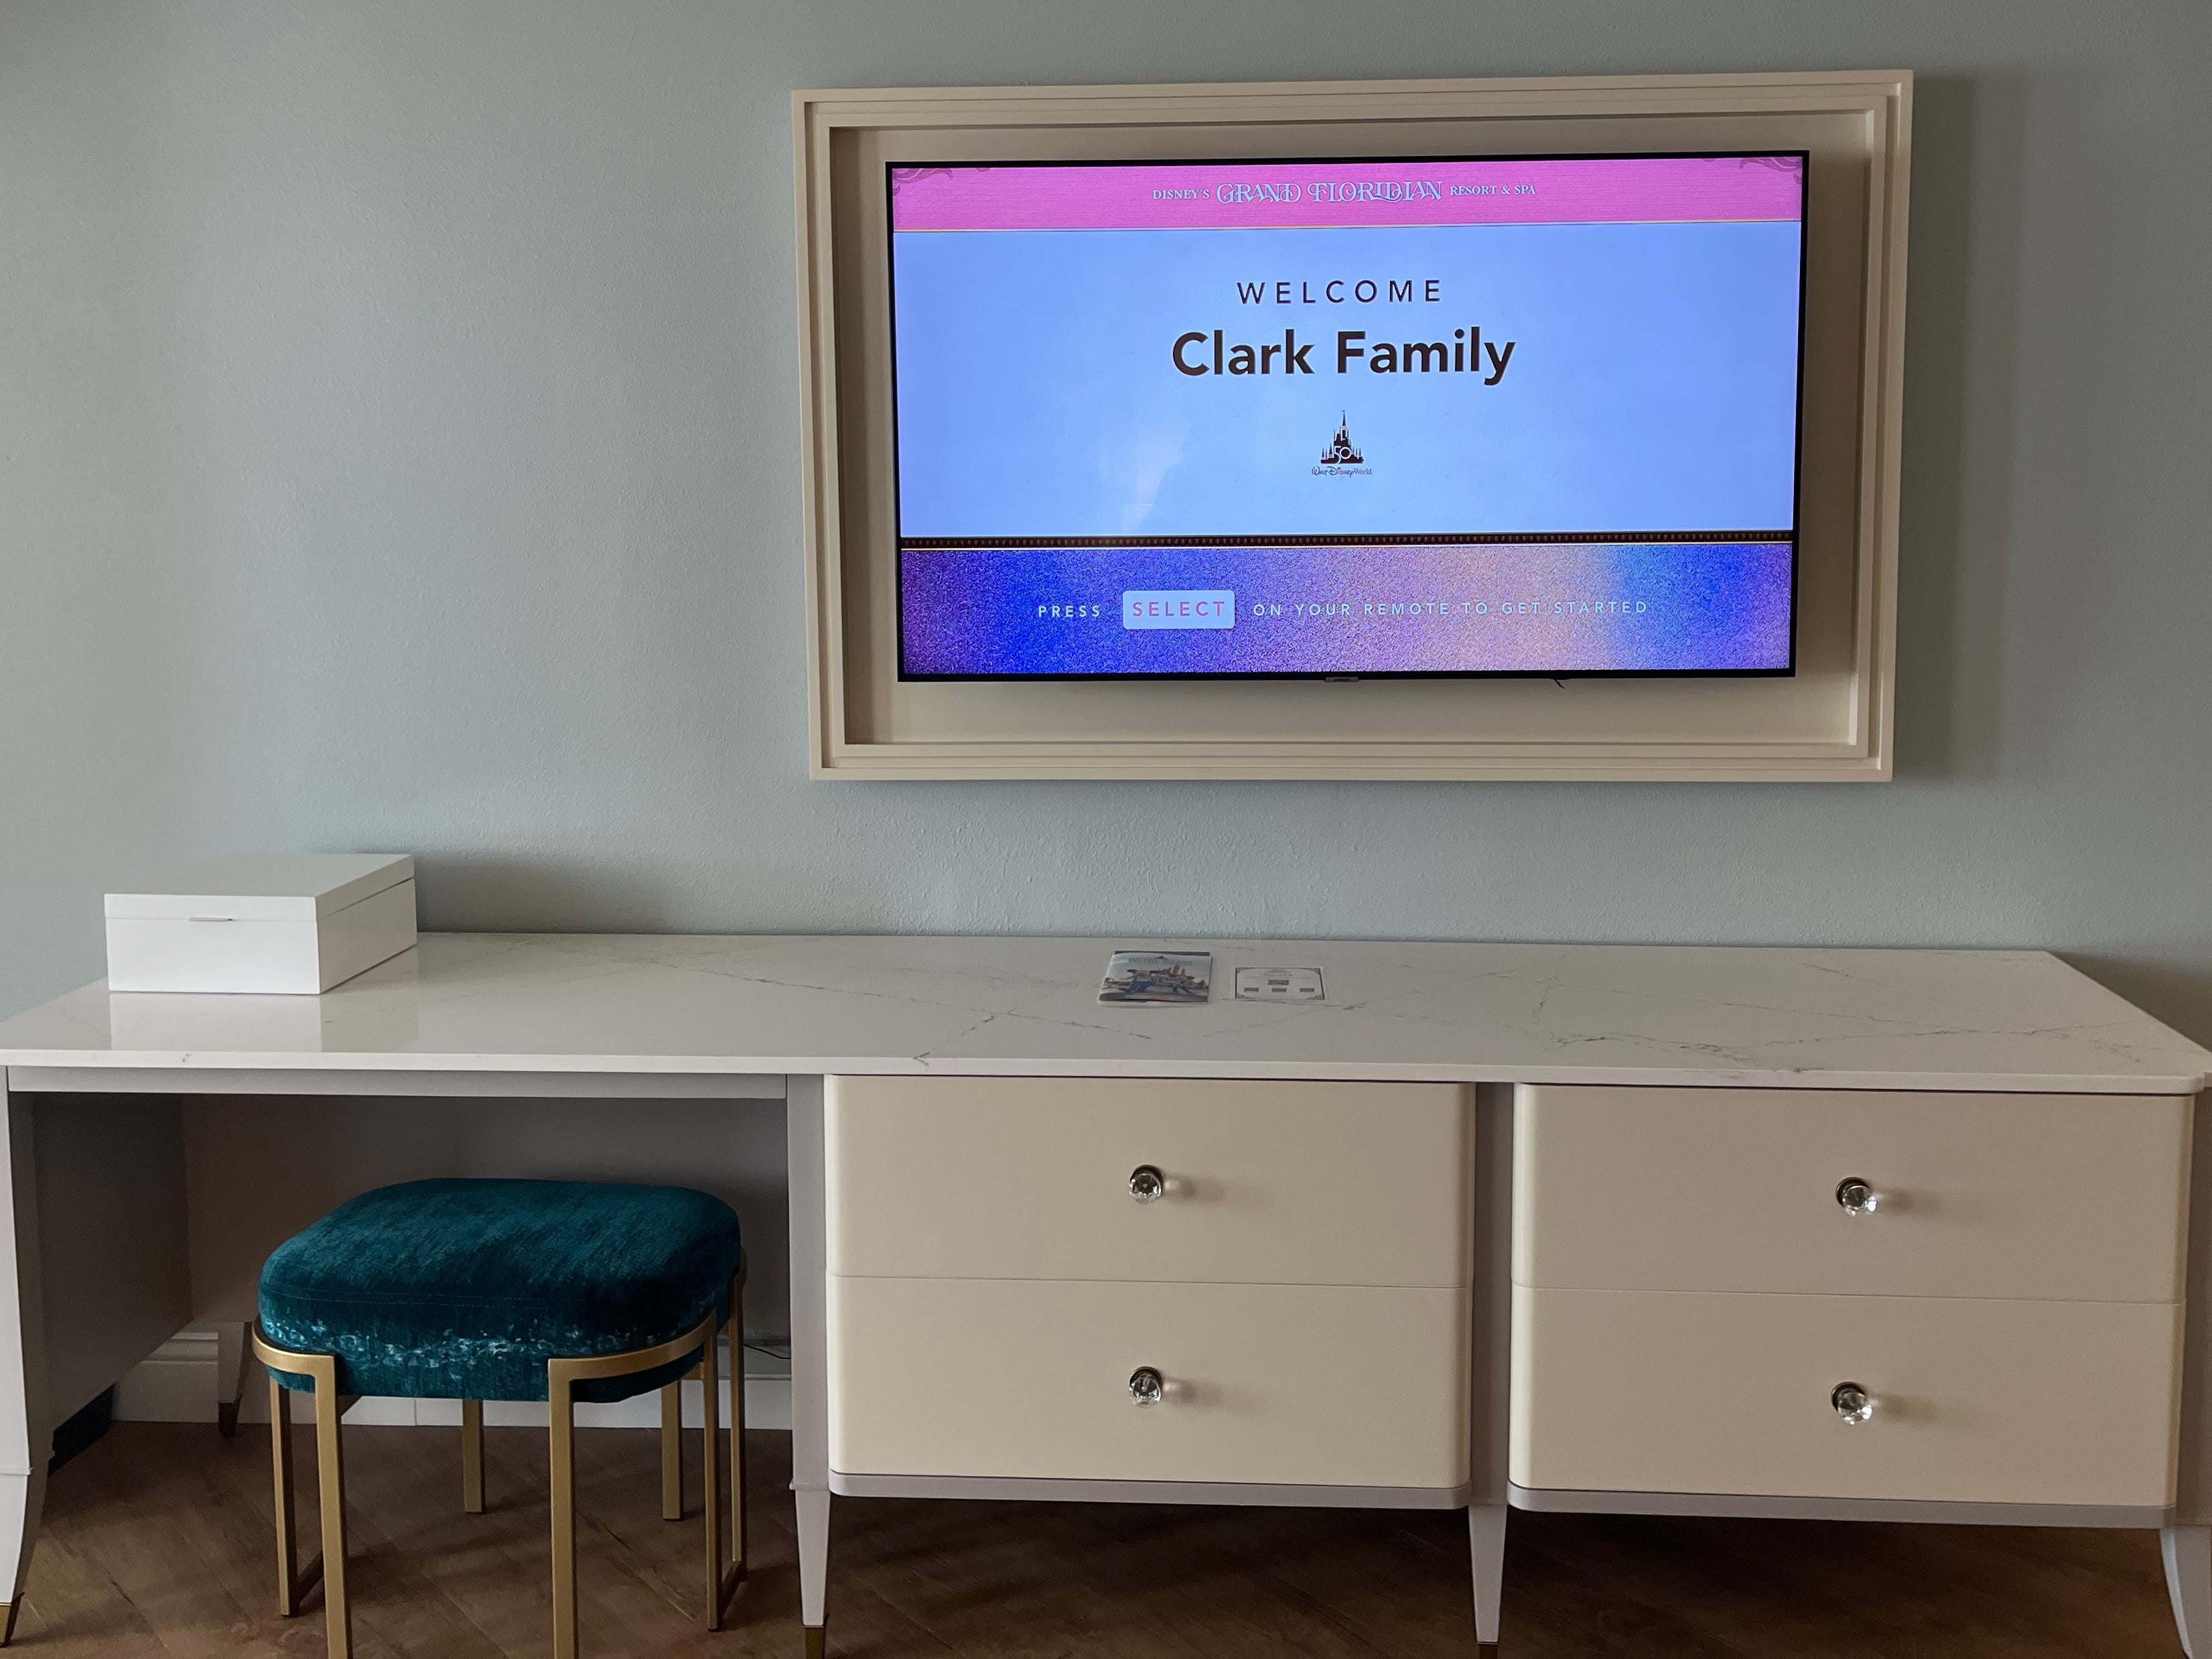 <p>When I walked into the room, I was happy to see my last name written on the television screen.</p><p>It was a nice personal touch and made the room feel even more homelike.</p>